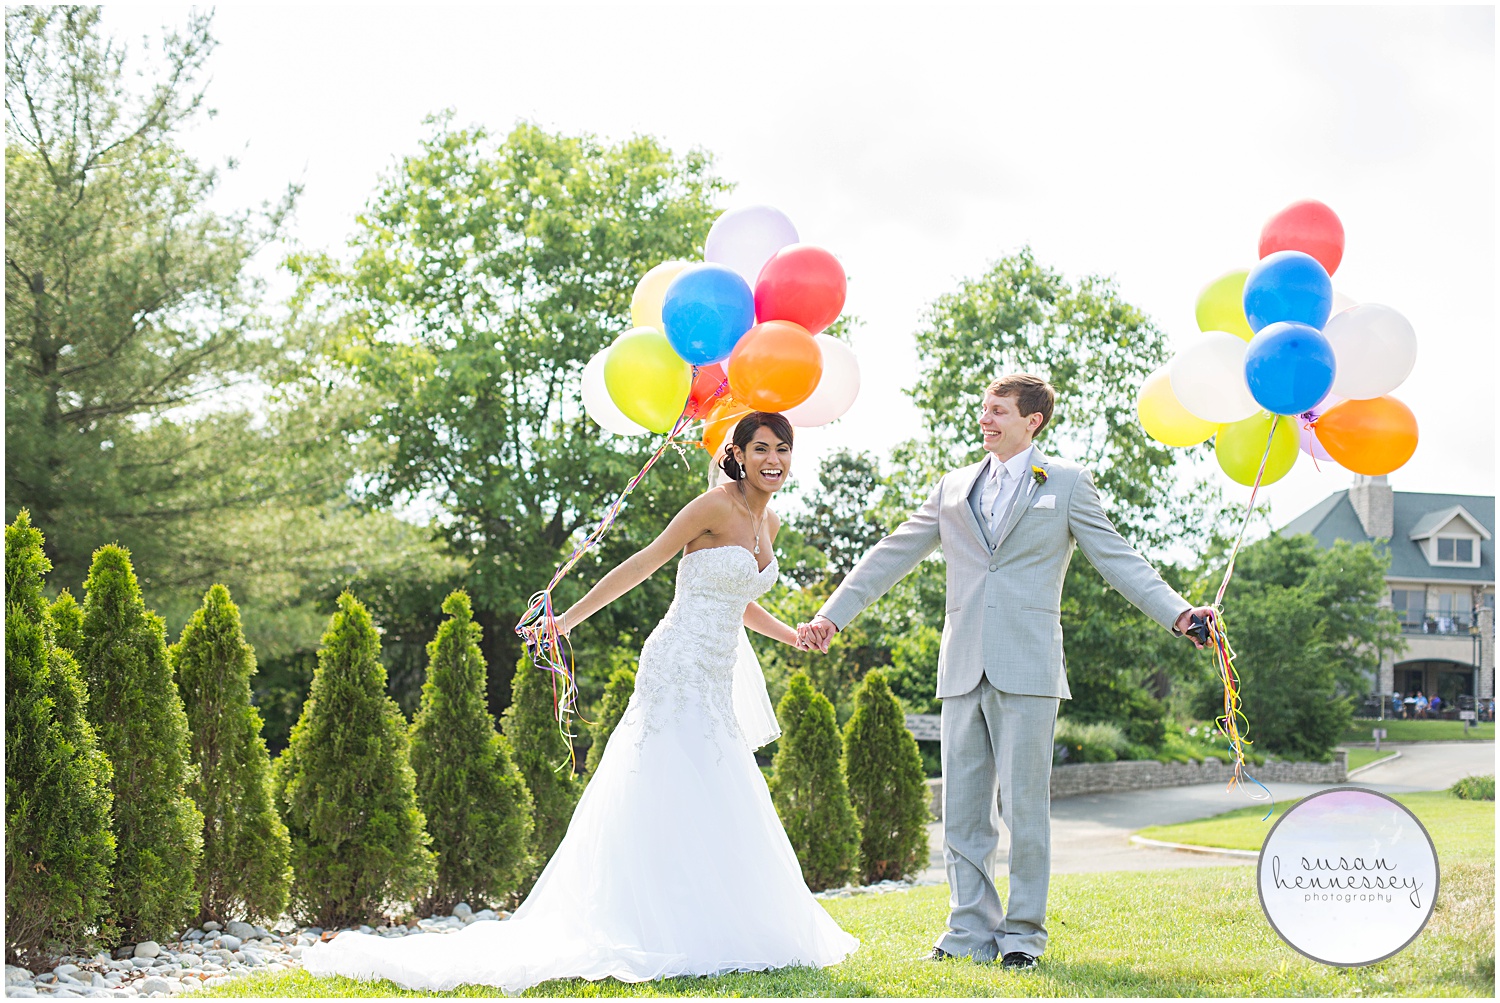 Happy couple pose with colorful balloons on their wedding day.